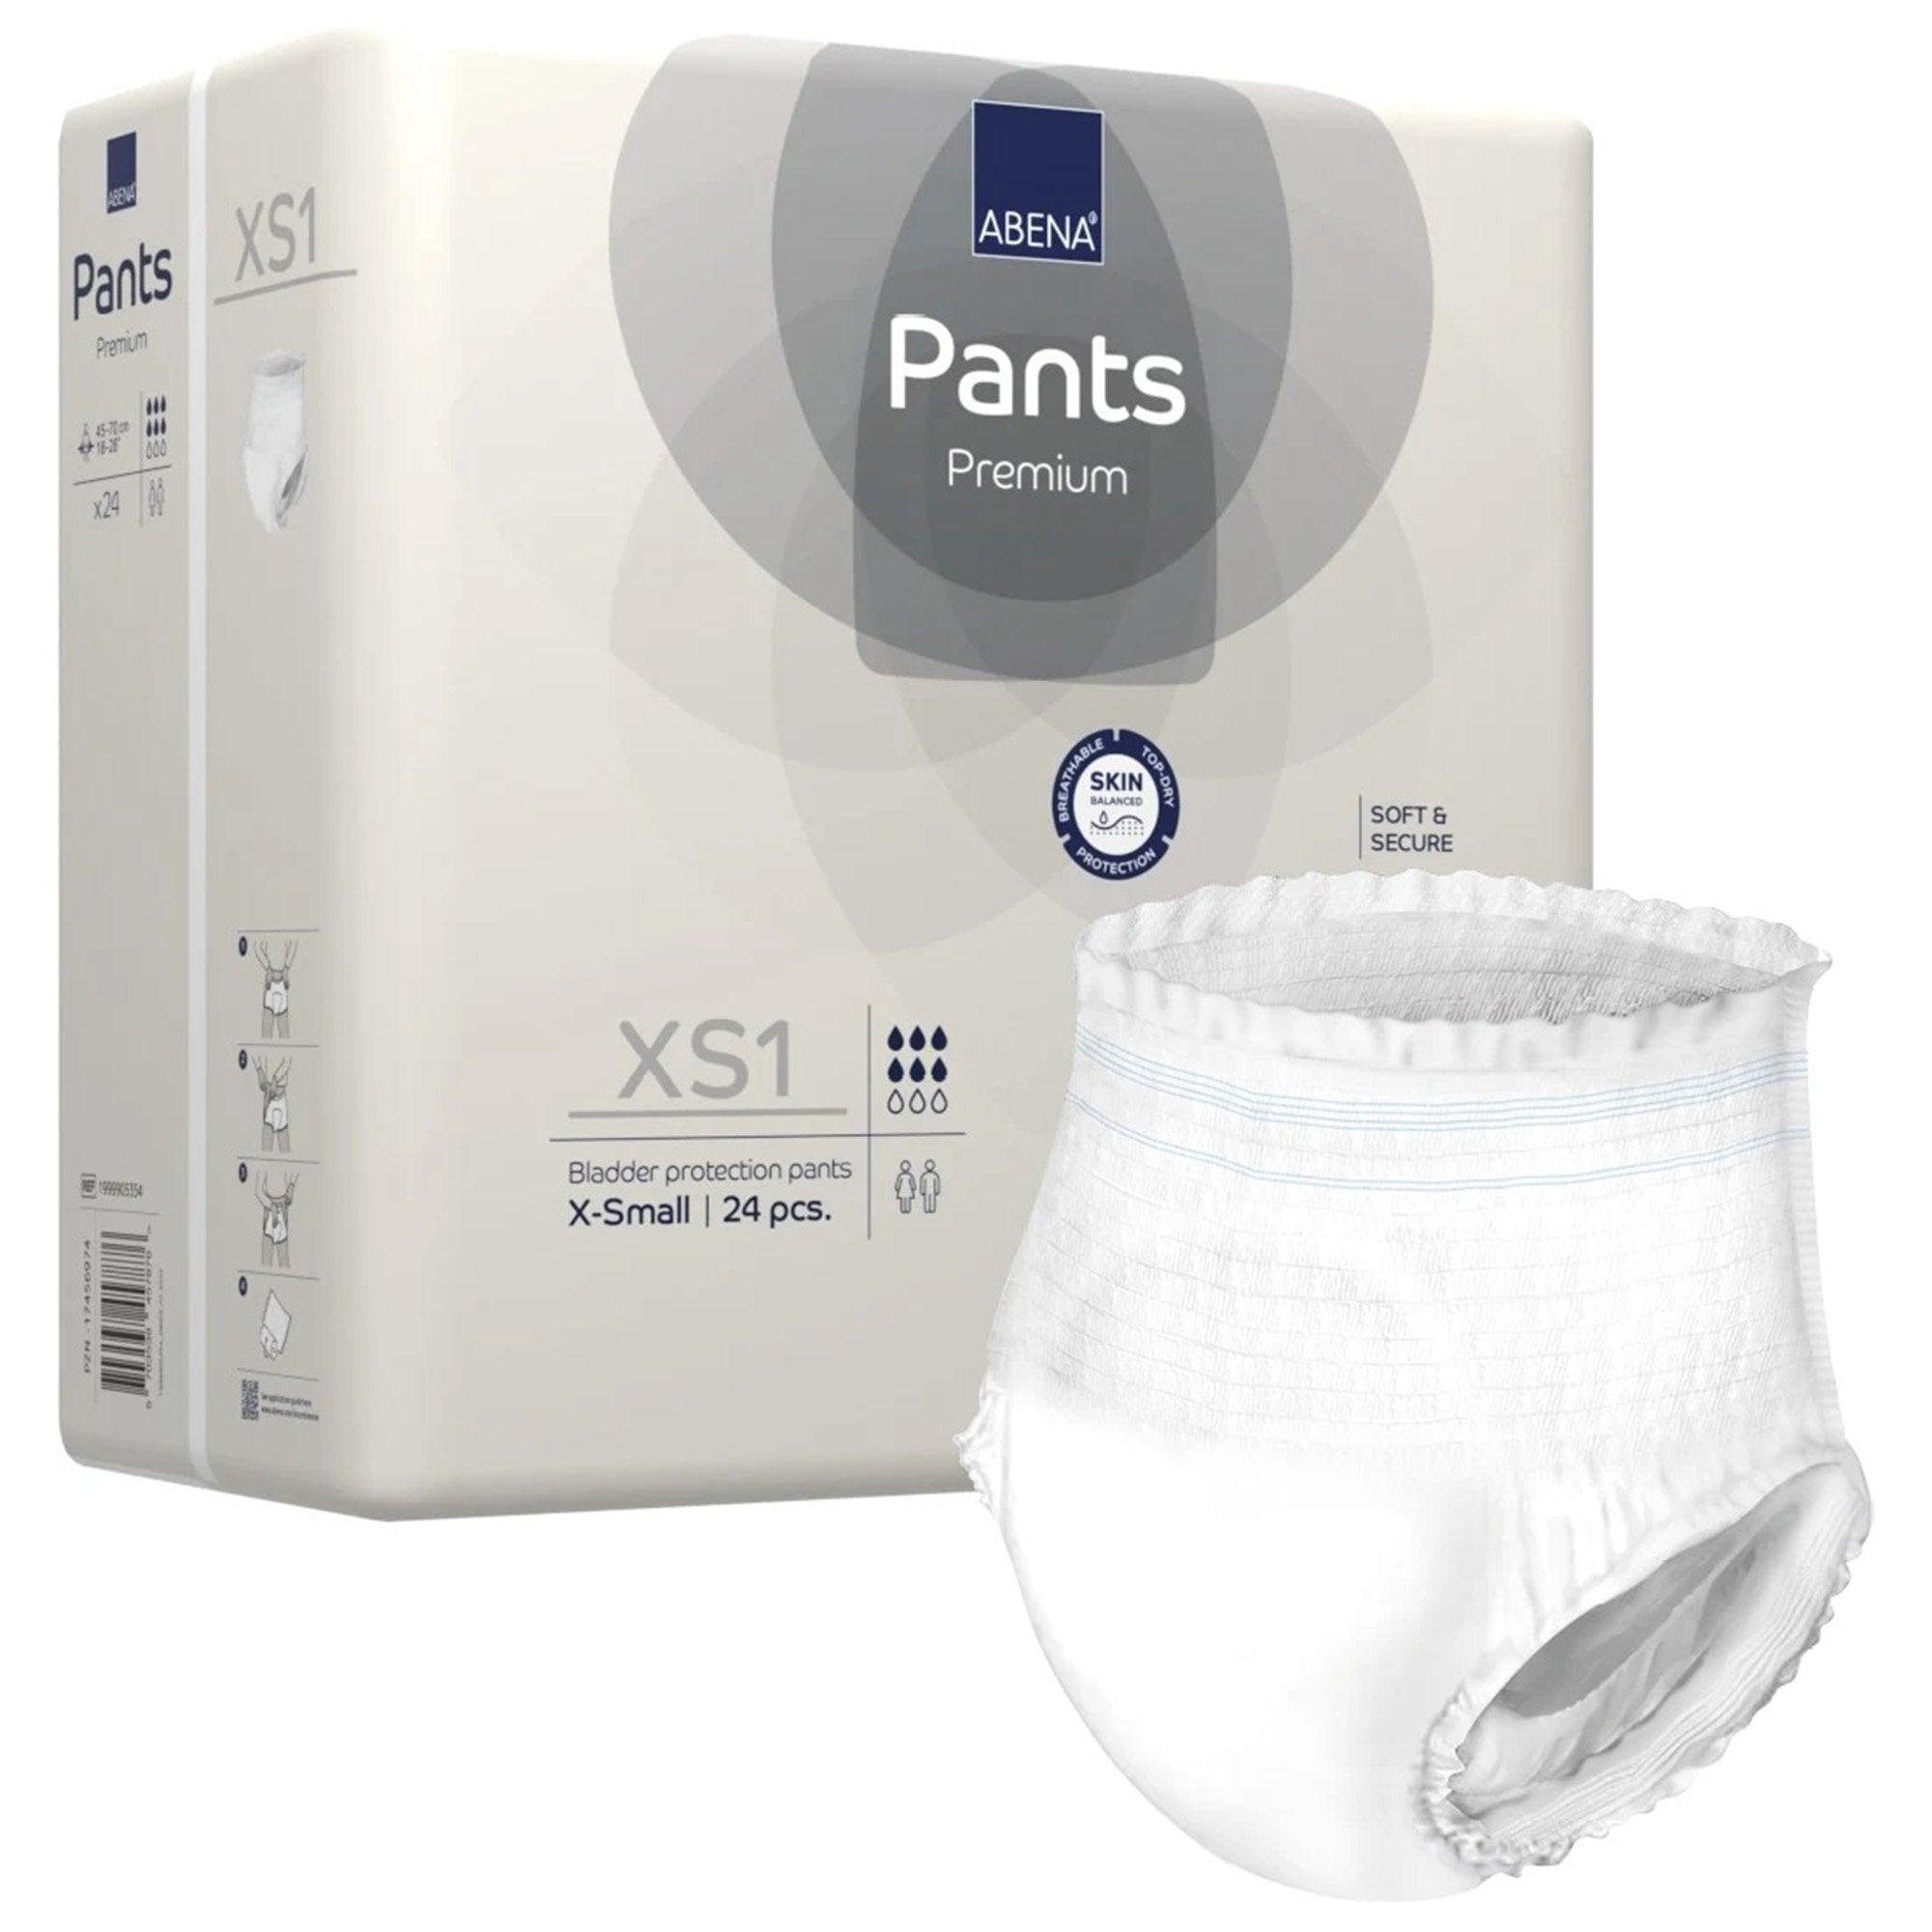 Unisex Adult Absorbent Underwear Abena® Premium Pants XS1 Pull On with Tear Away Seams X-Small Disposable Moderate Absorbency